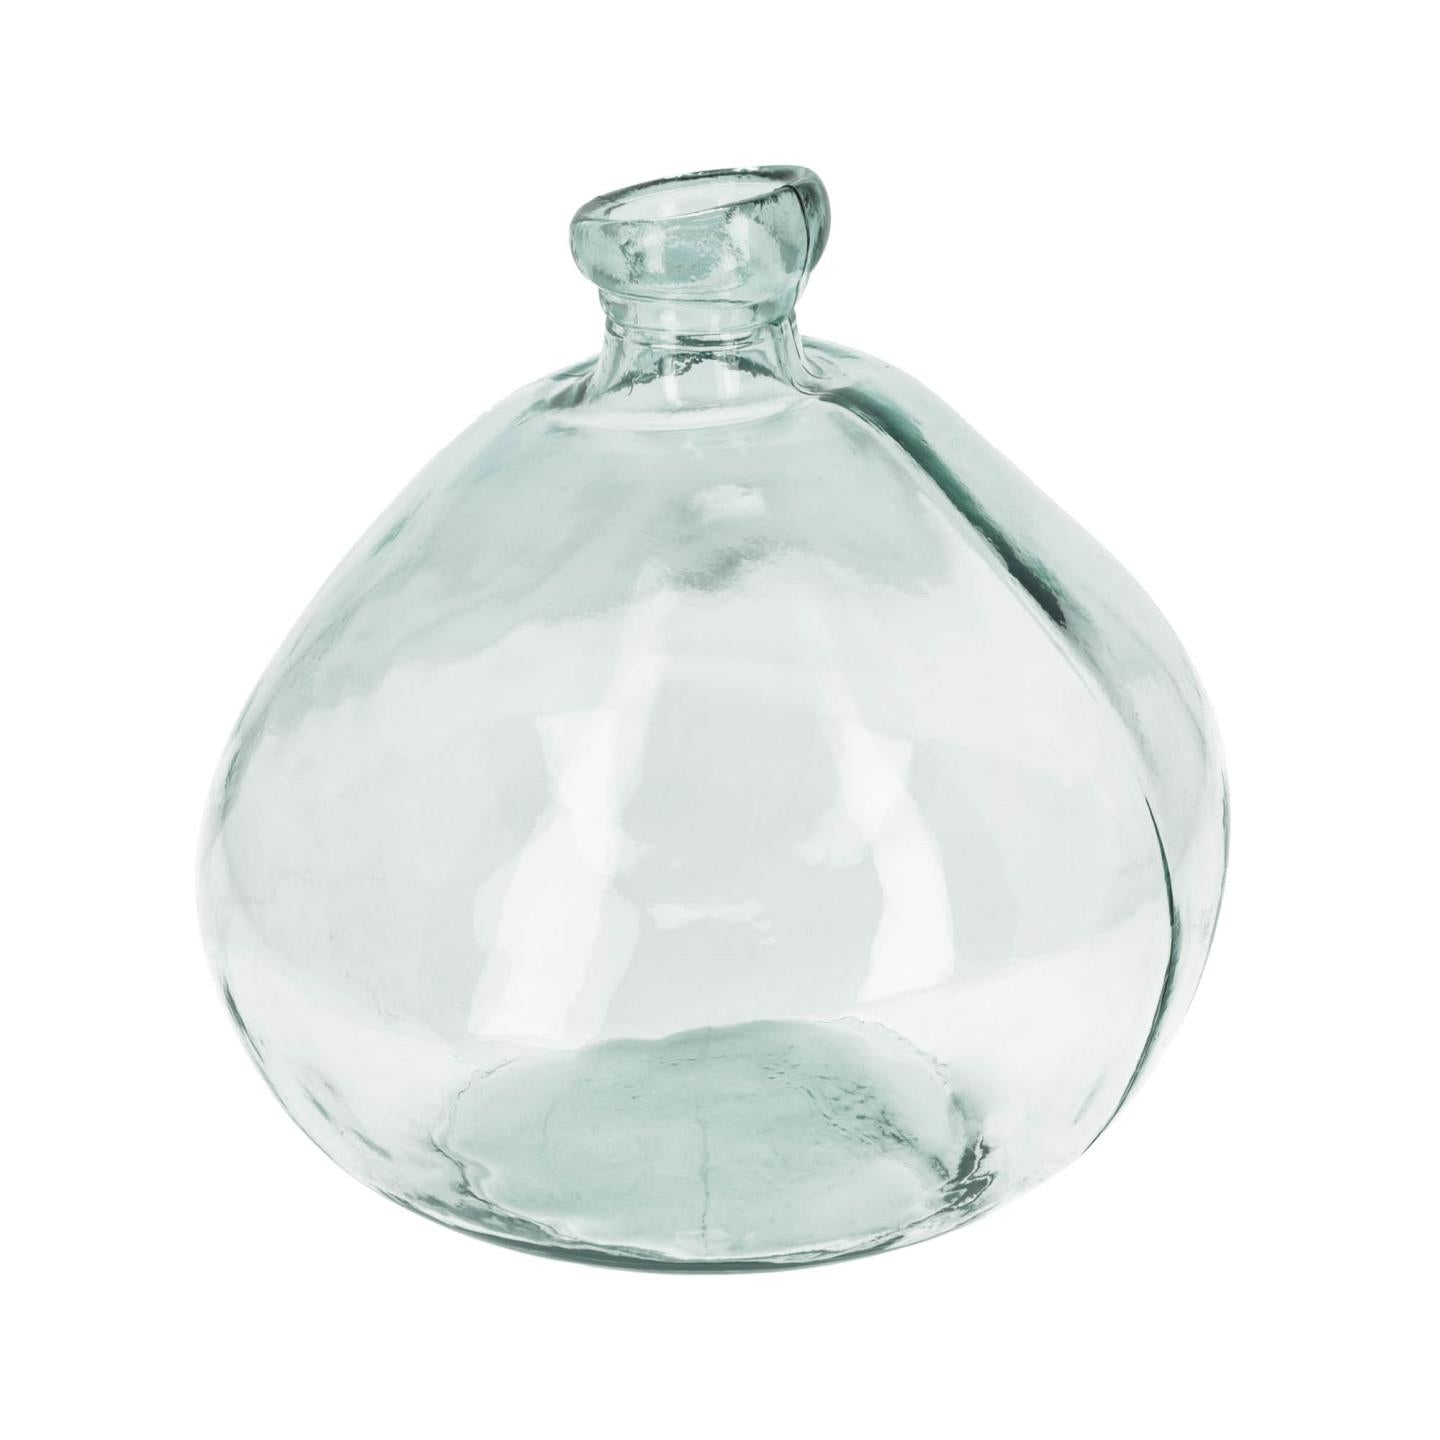 Brenna vase in 100% recycled transparent glass, 33 cm